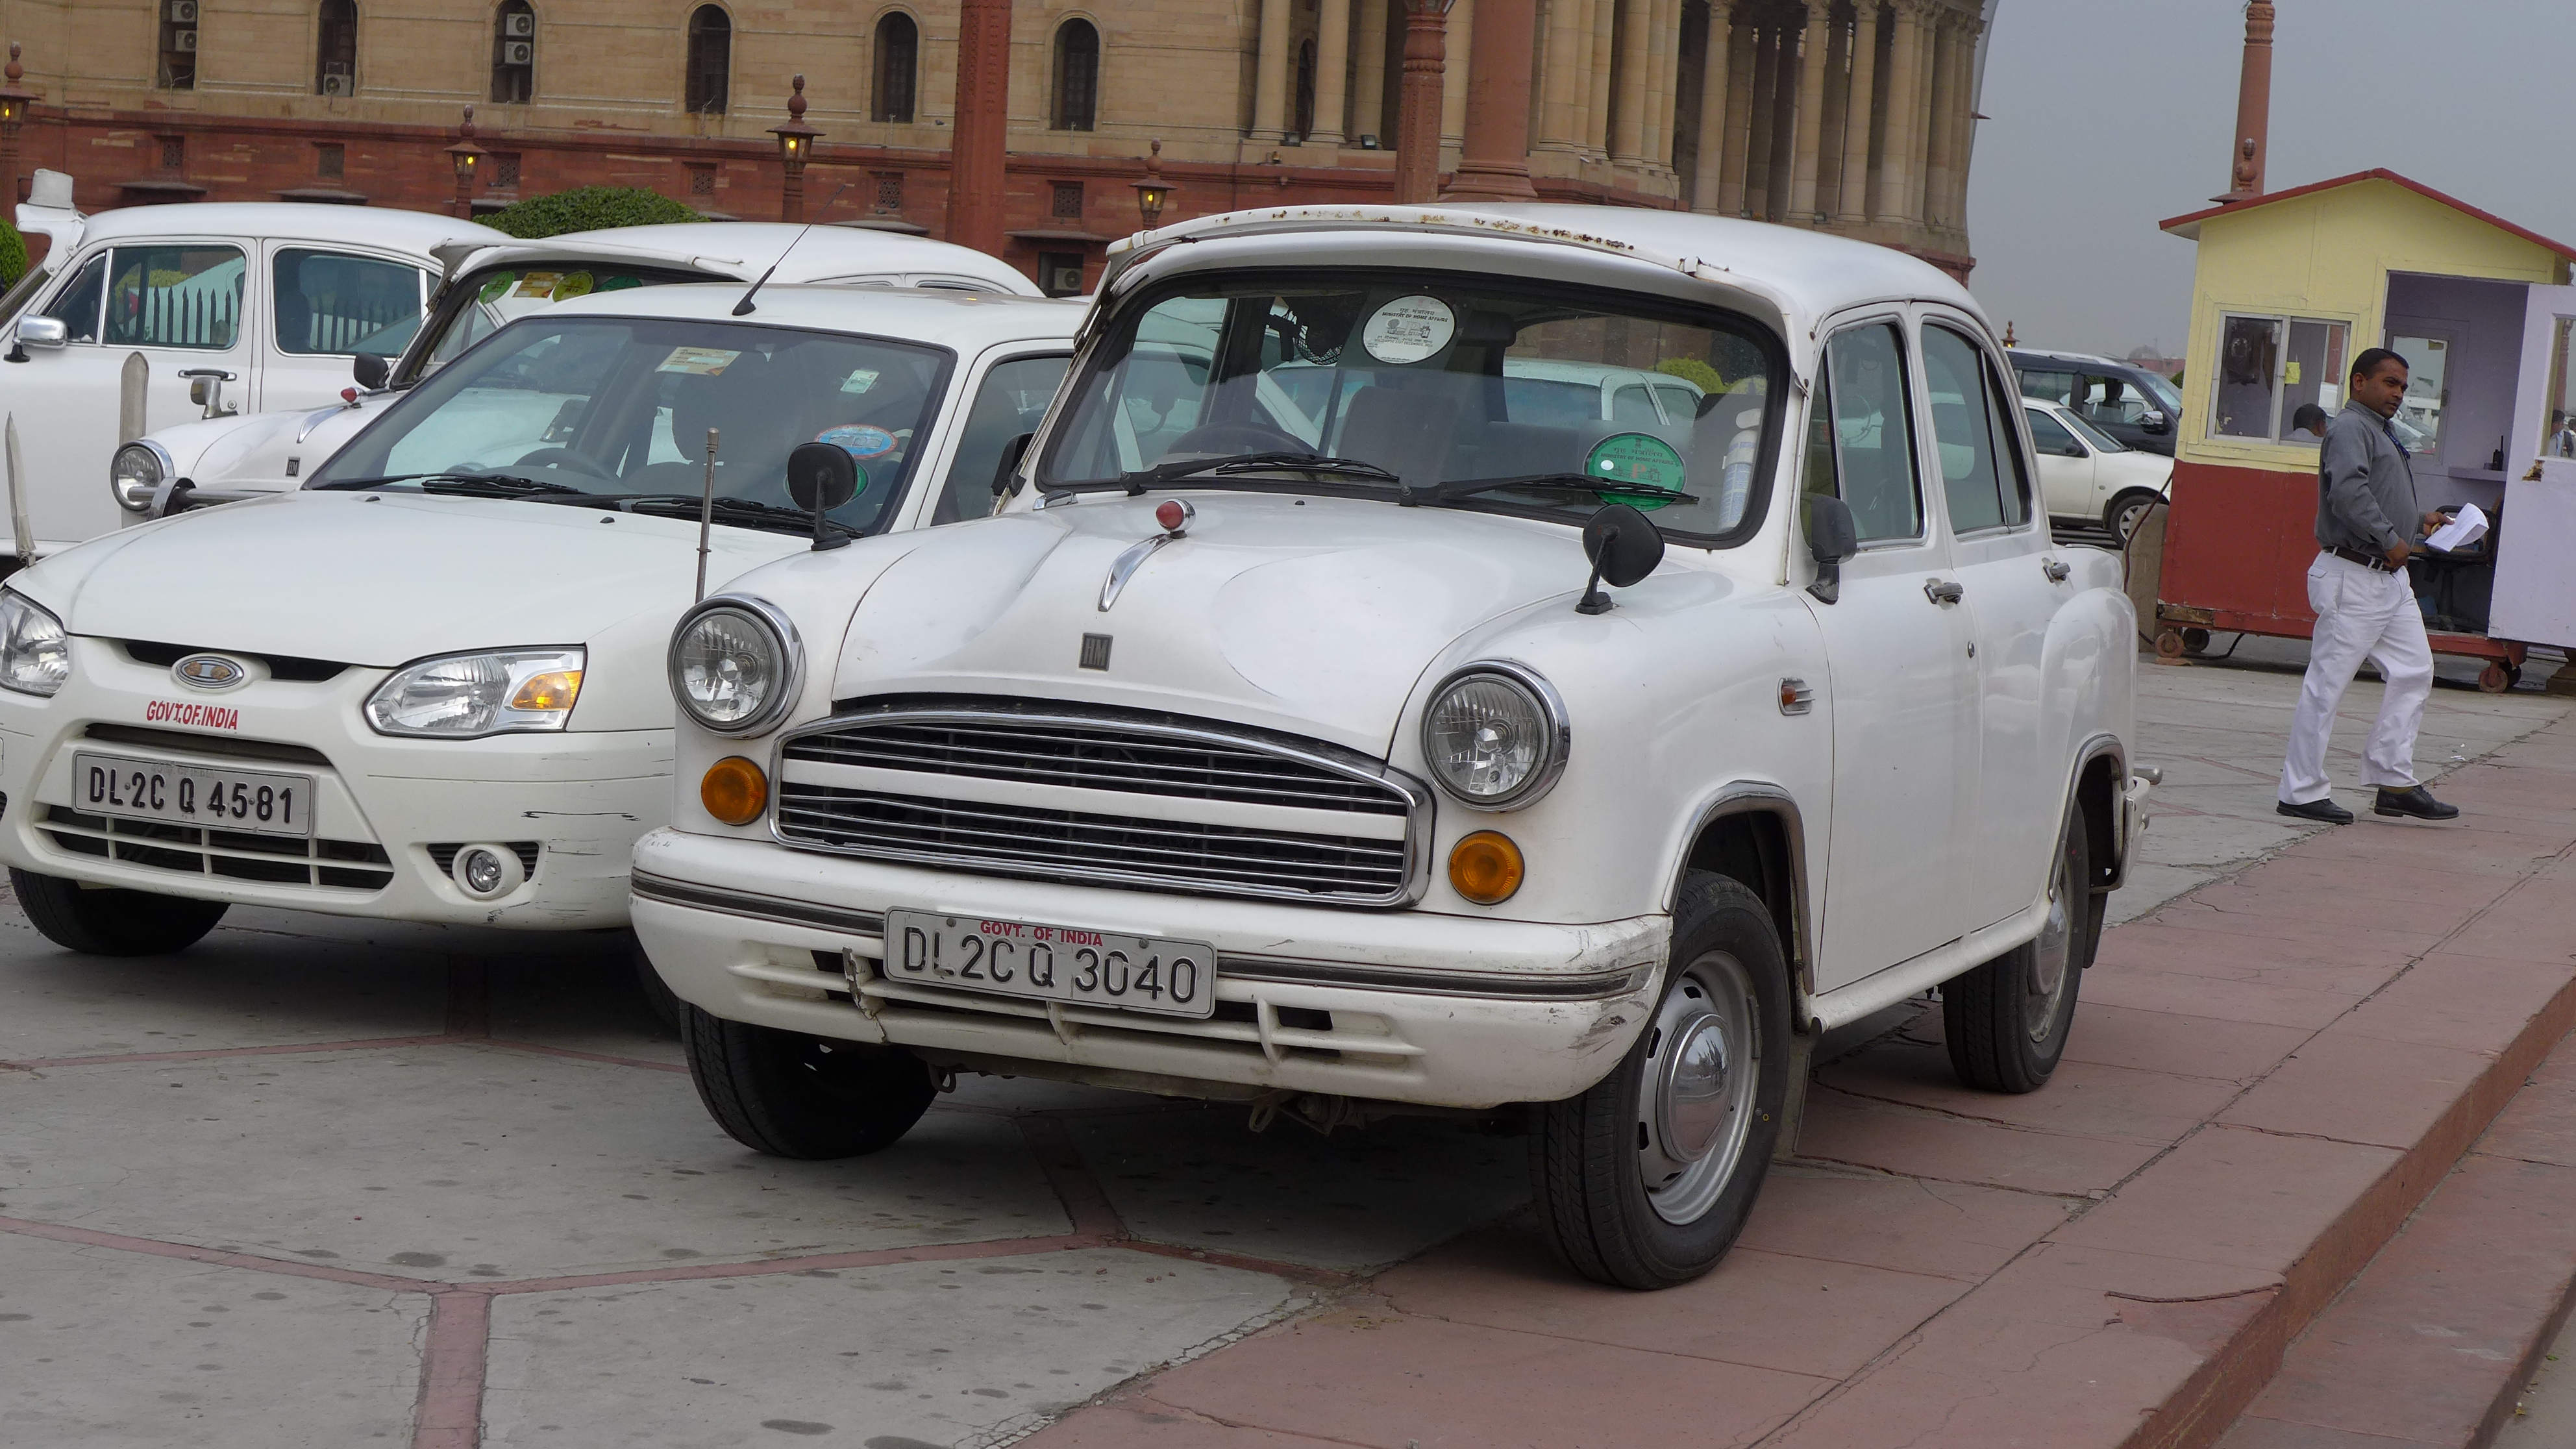 Hindustan Ambassador, the ubiquitous "official" government car for decades. 